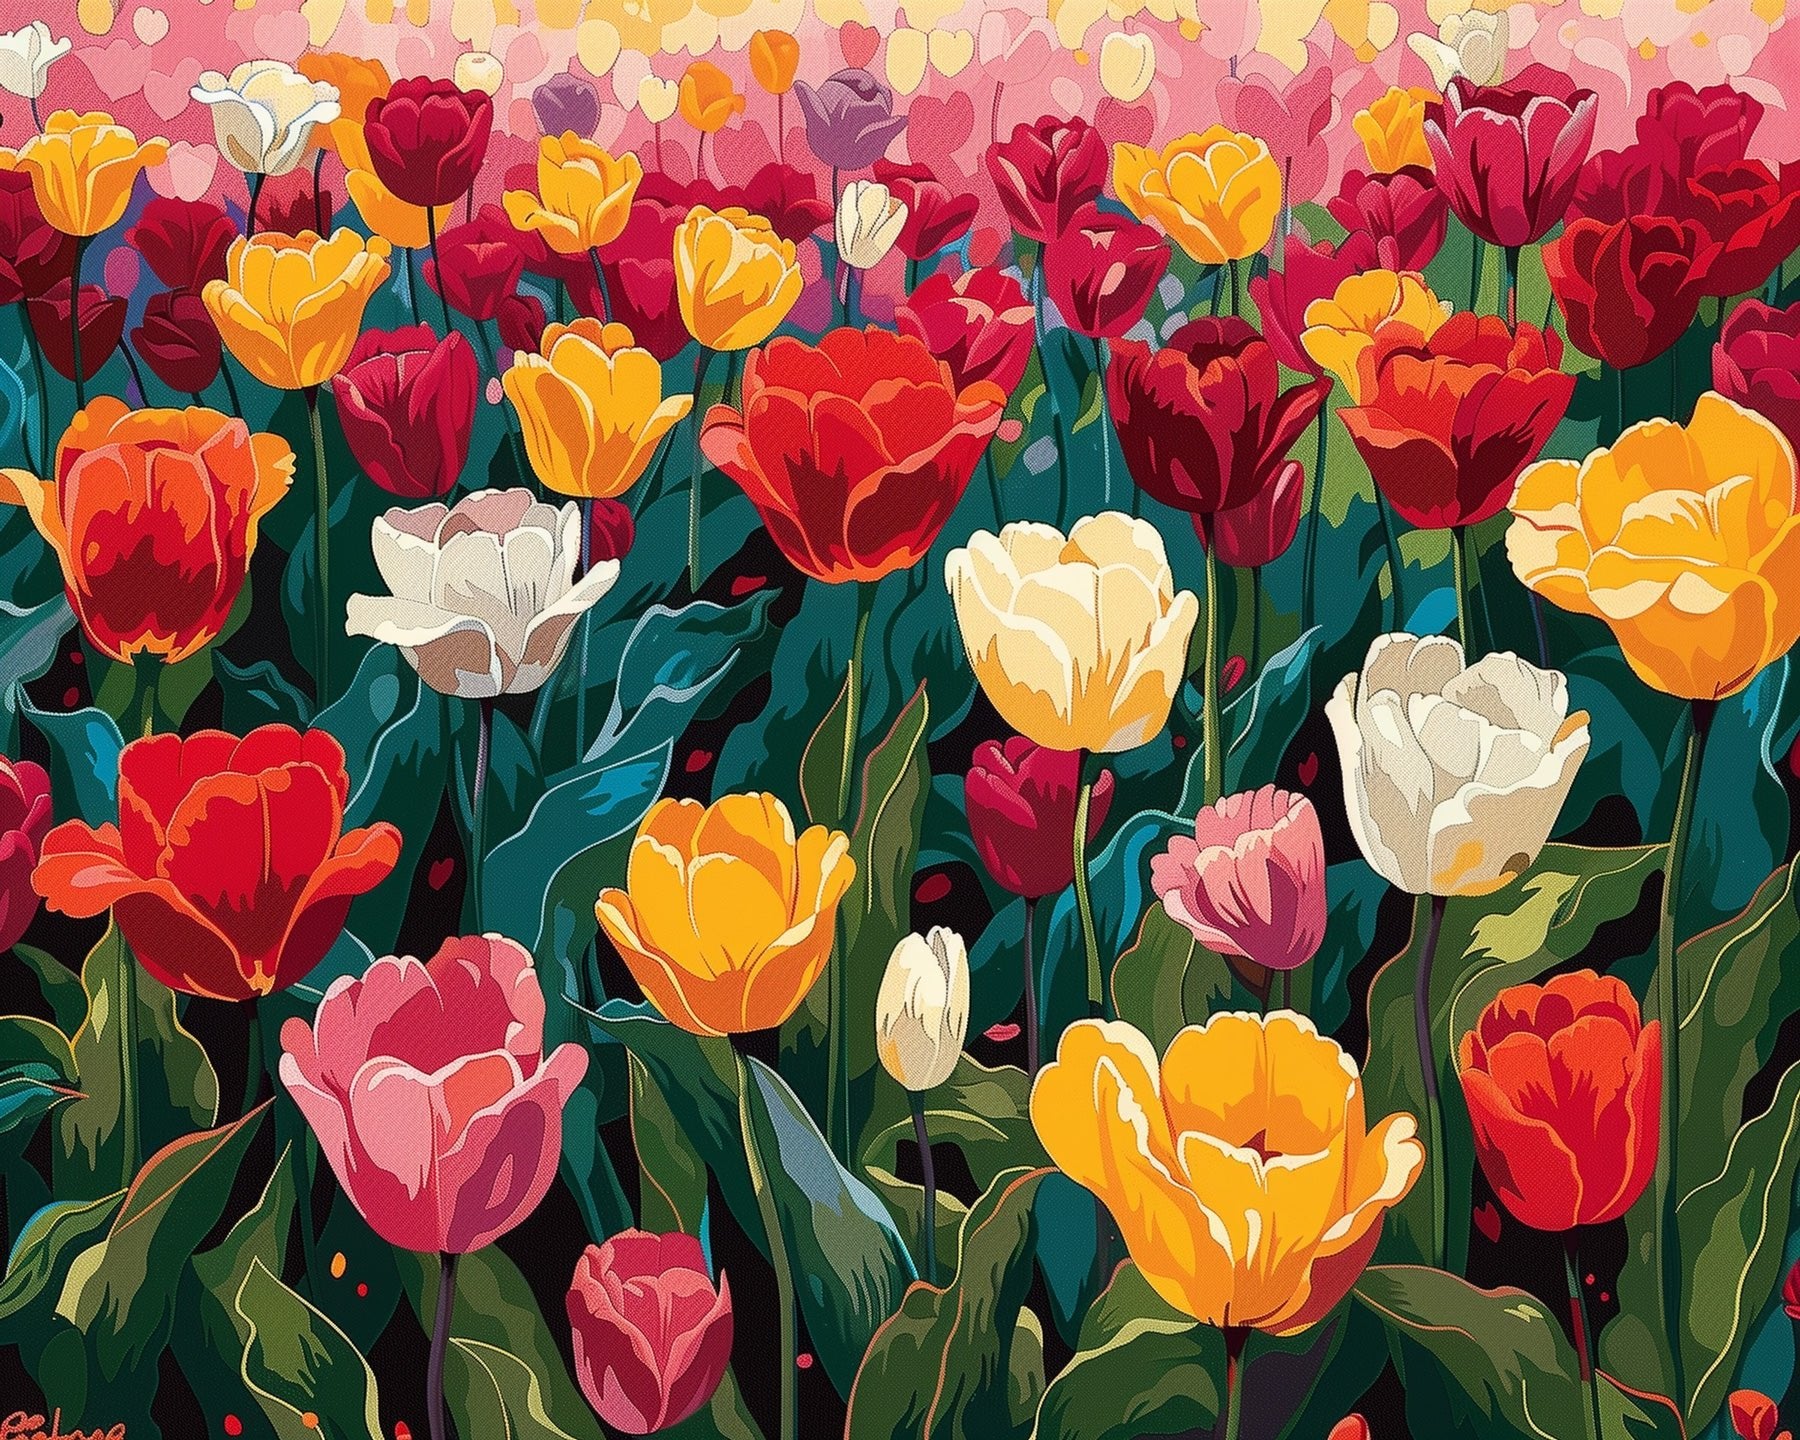 Field of Tulips - BestPaintByNumbers - Paint by Numbers Fixed Kit